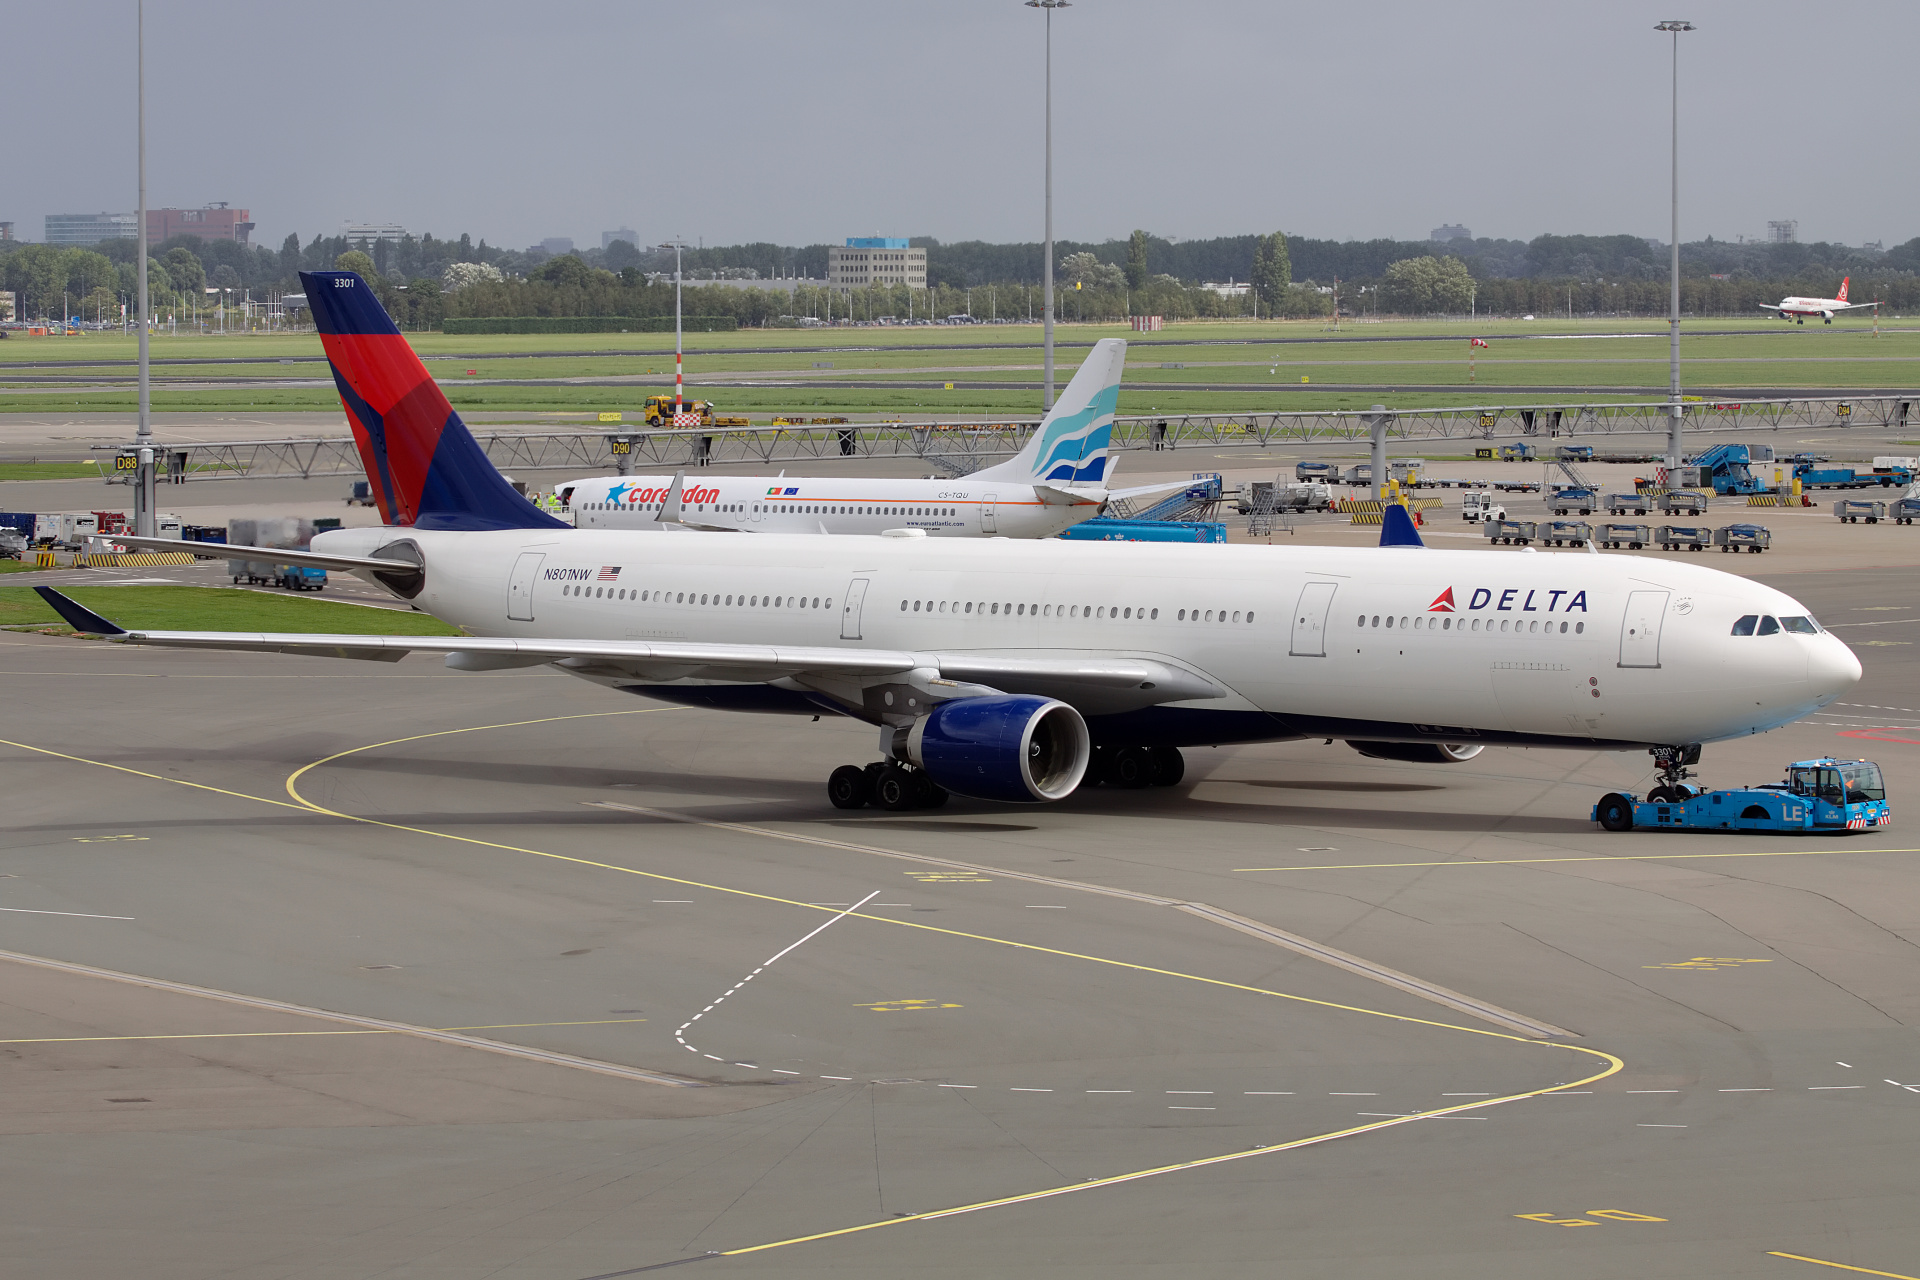 N801NW (Aircraft » Schiphol Spotting » Airbus A330-300 » Delta Airlines)